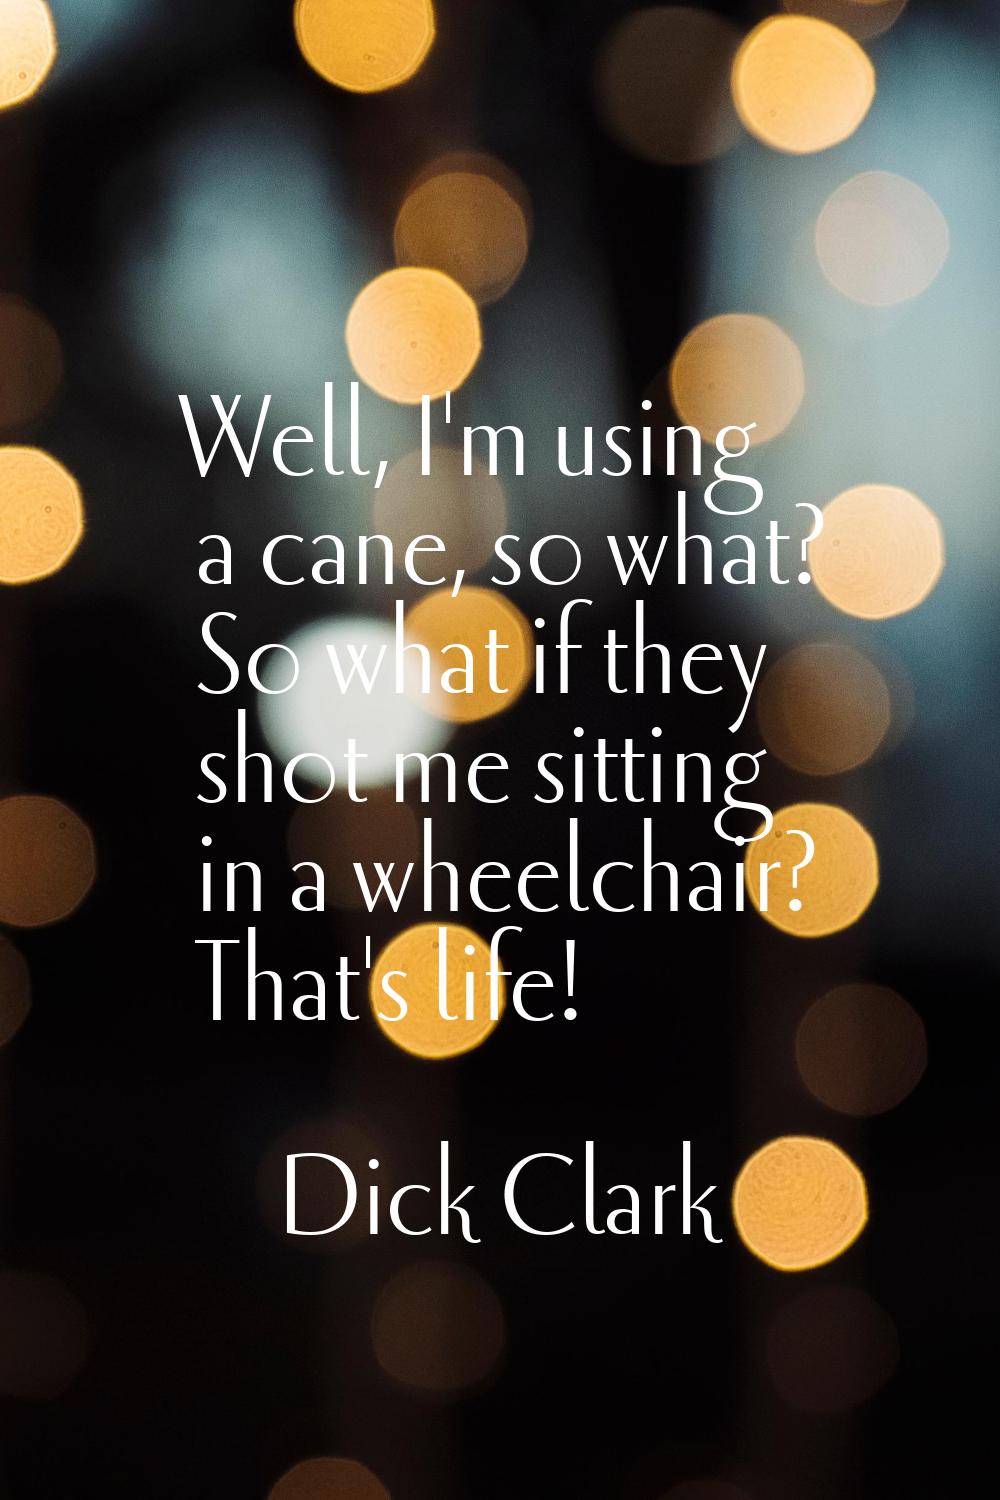 Well, I'm using a cane, so what? So what if they shot me sitting in a wheelchair? That's life!